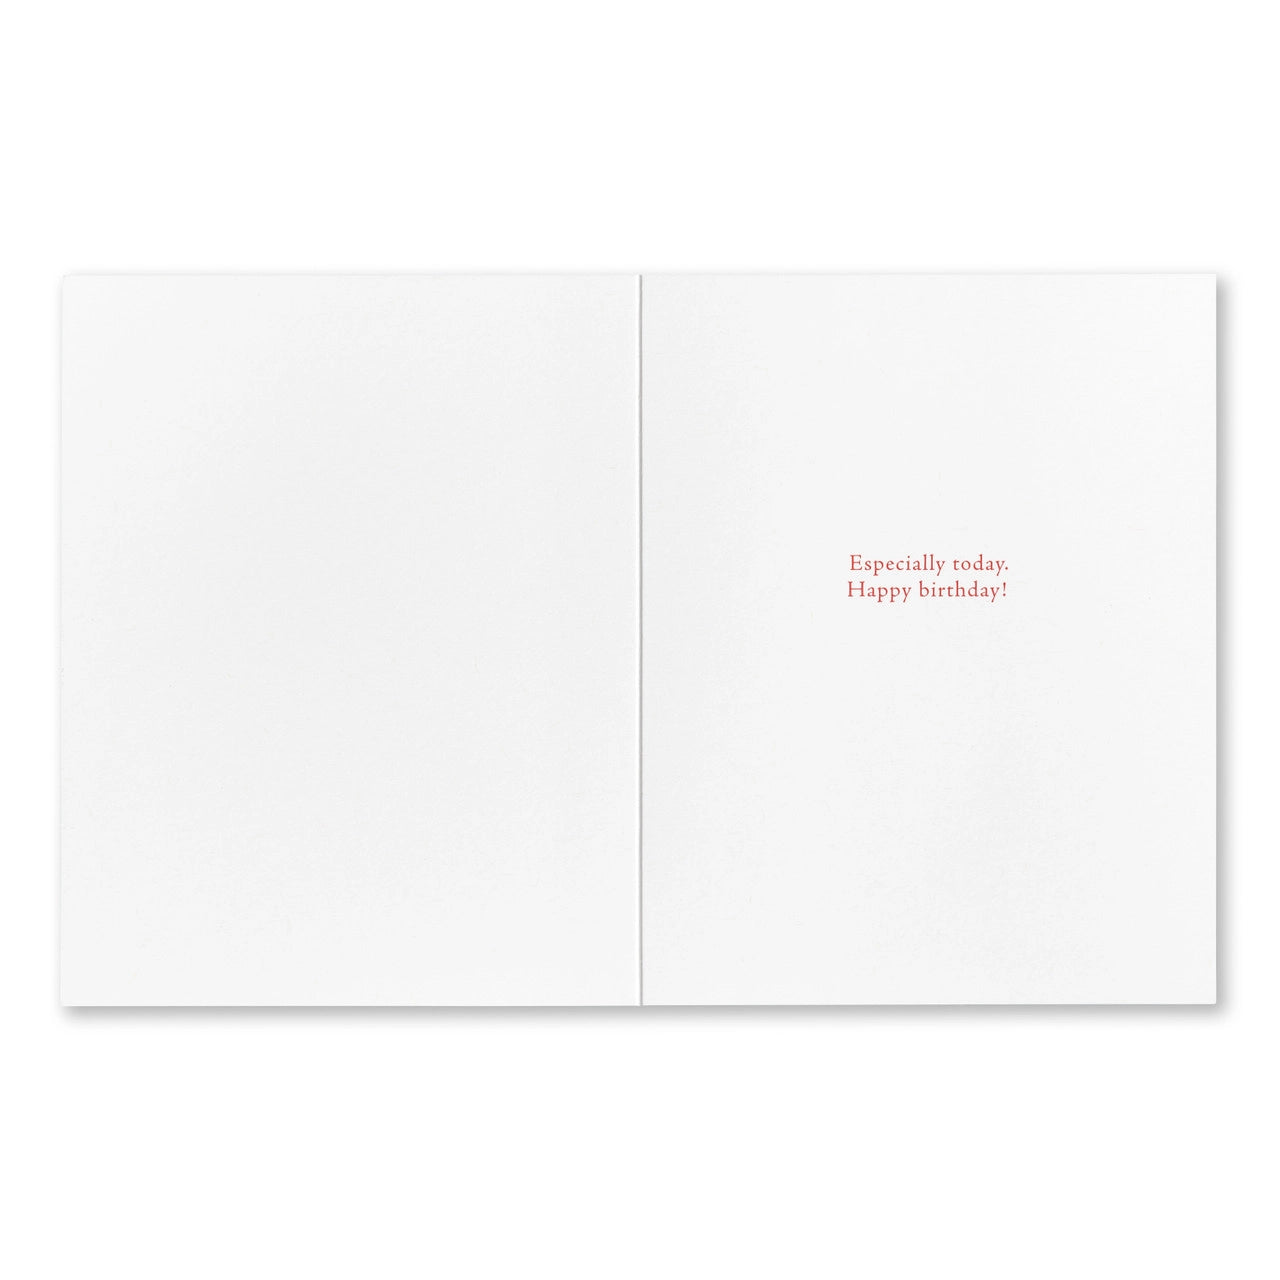 Live All You Can... -Henry James - Birthday Greeting Card - Mellow Monkey